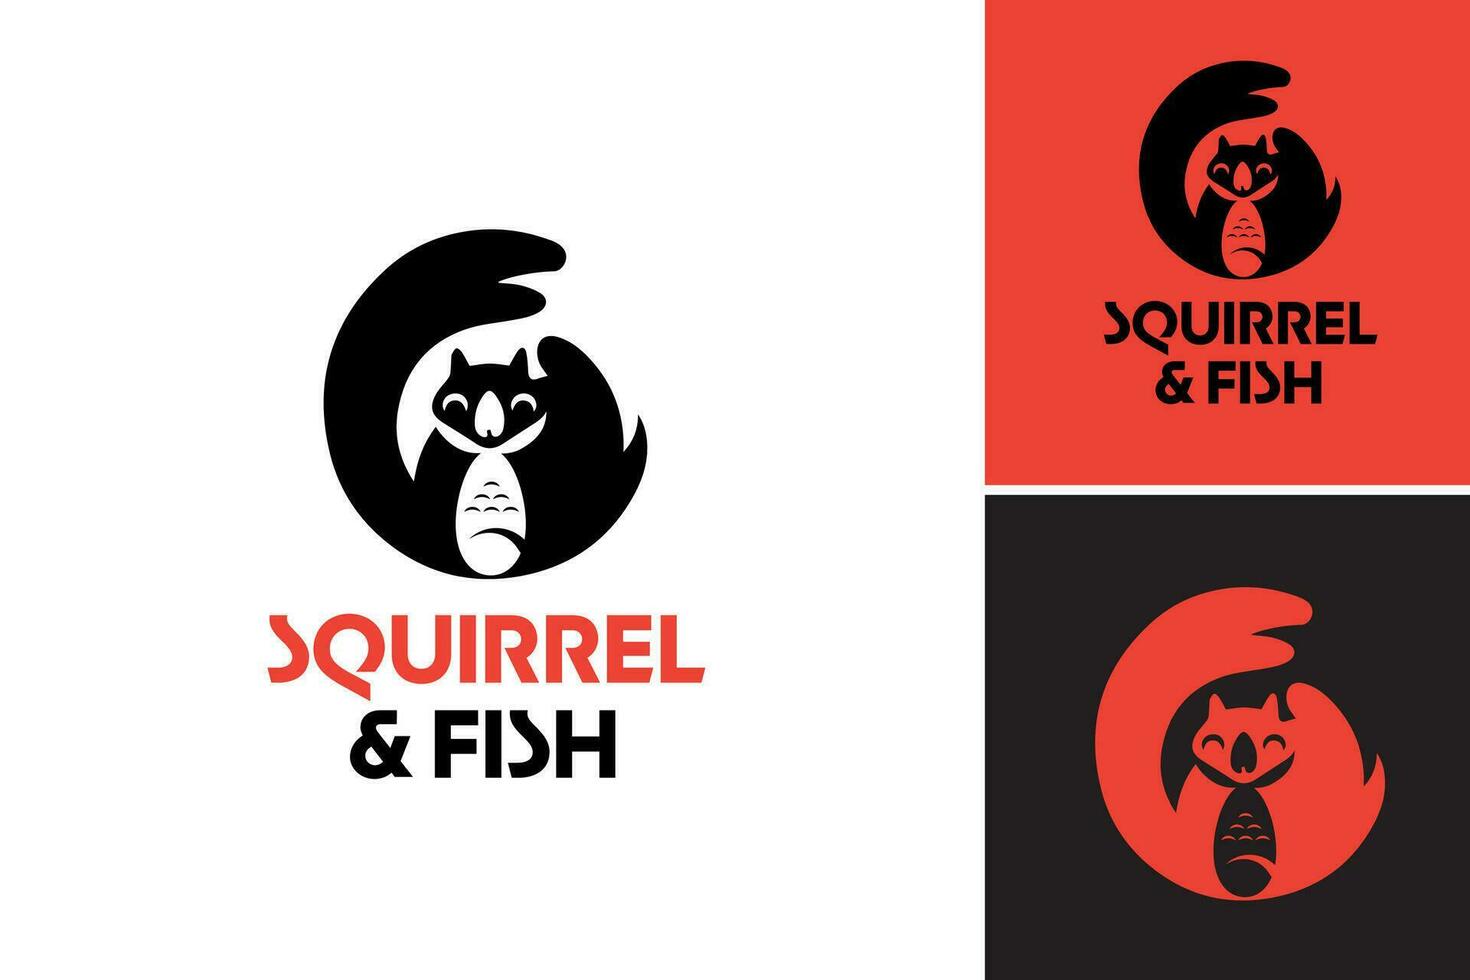 squirrel and fish logo is a design asset featuring a playful combination of a squirrel and a fish, suitable for a brand or company related to nature, wildlife, or outdoor activities. vector